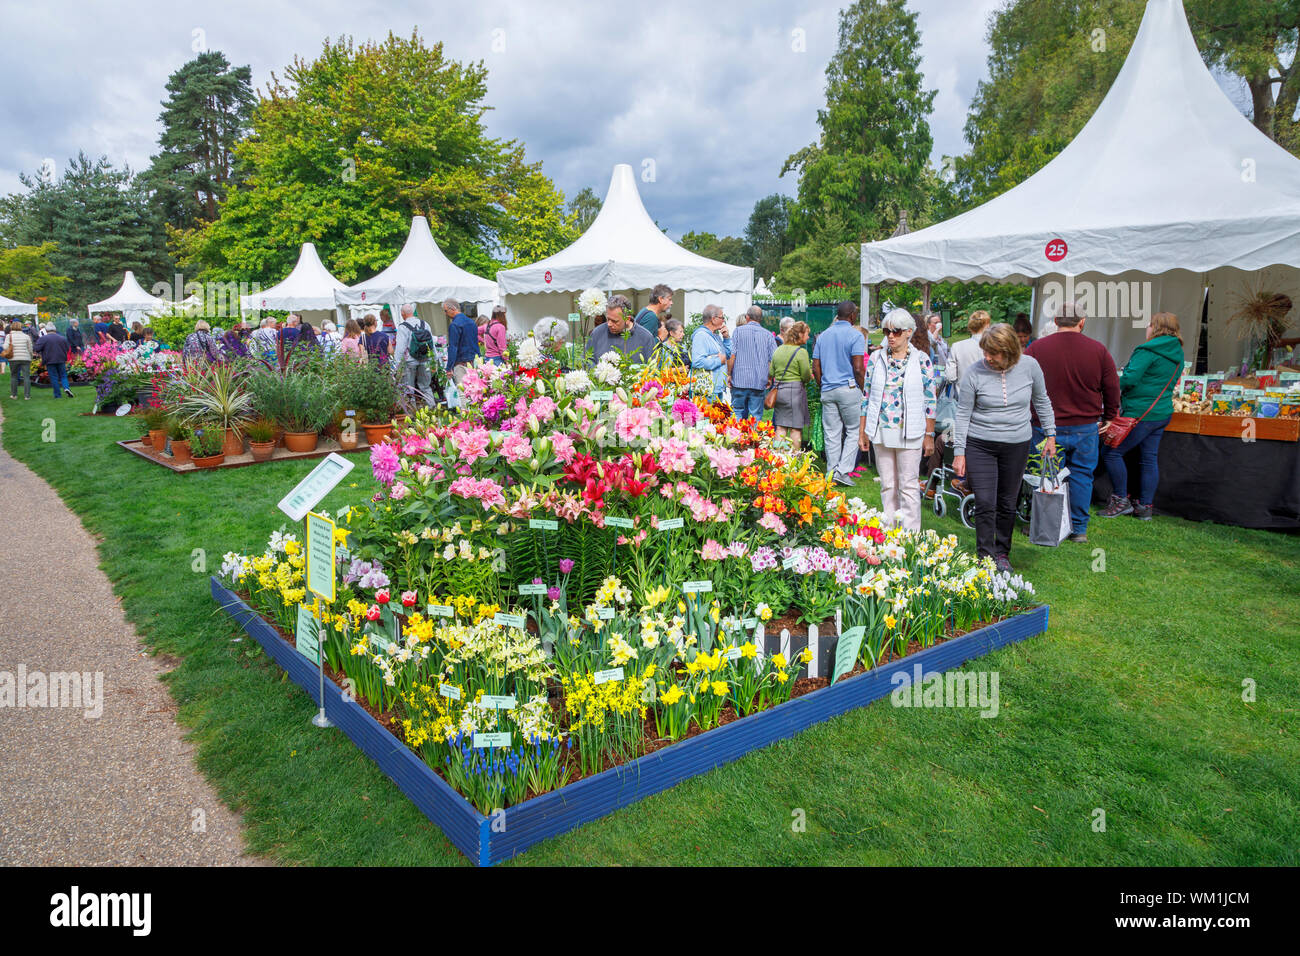 Stalls and display of colourful flowers at the September 2019 Wisley Garden Flower Show at RHS Garden Wisley, Surrey, south-east England Stock Photo